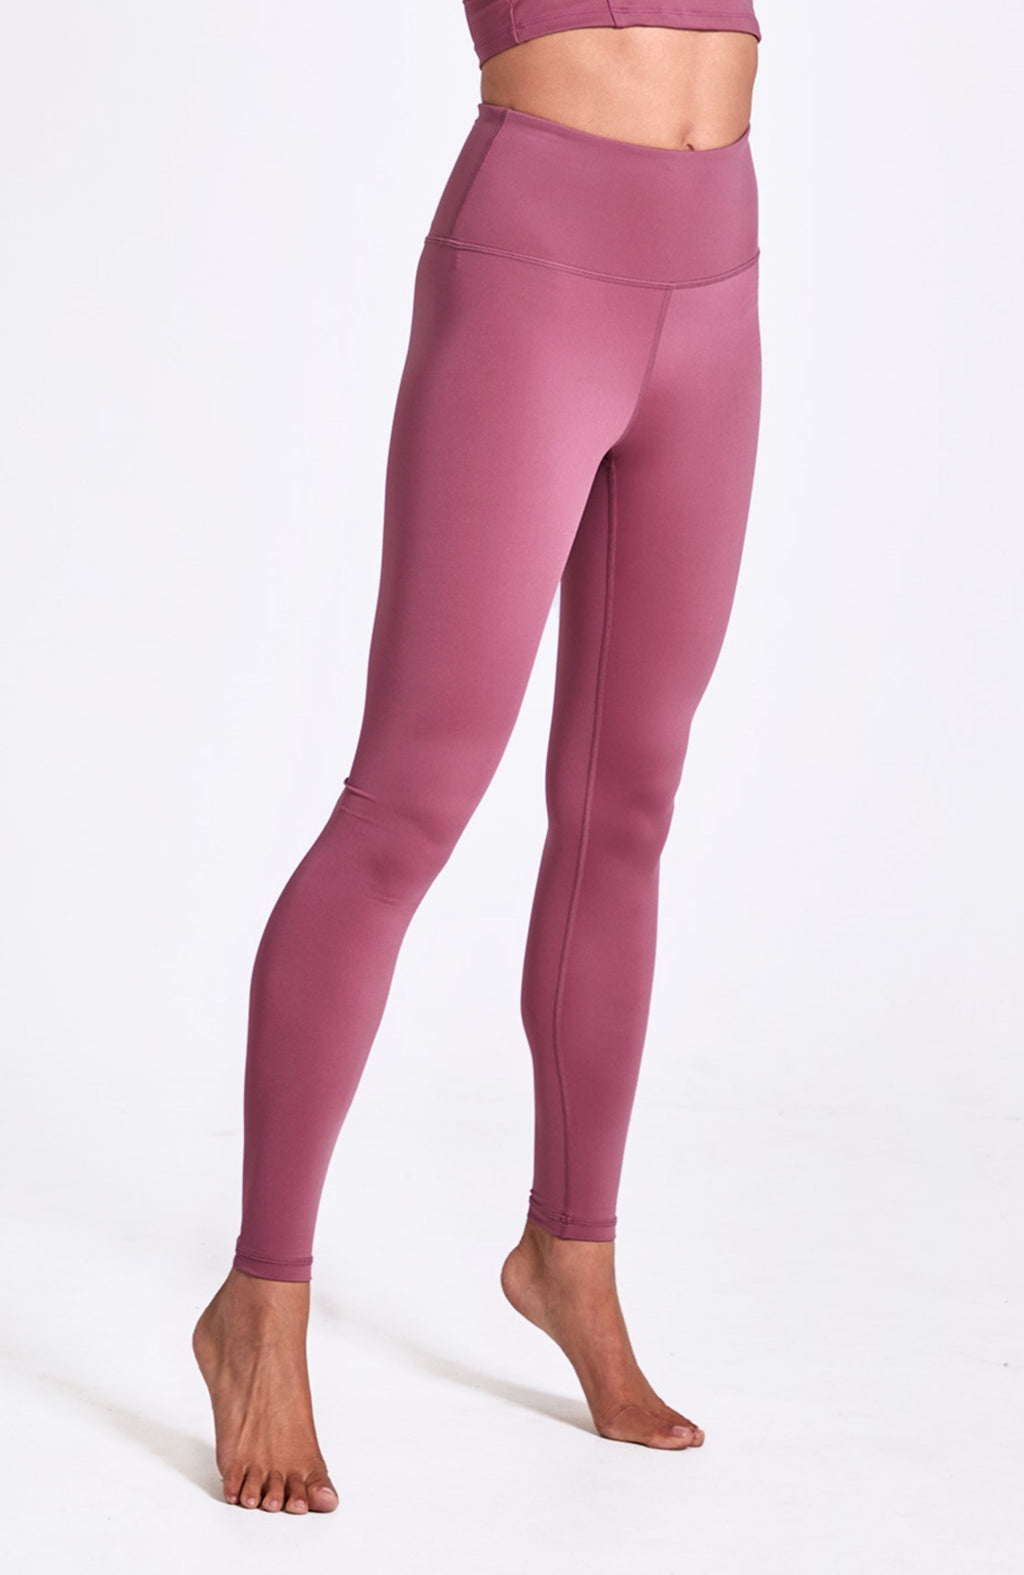 The Clematis Long Leggings by LABISK.OT